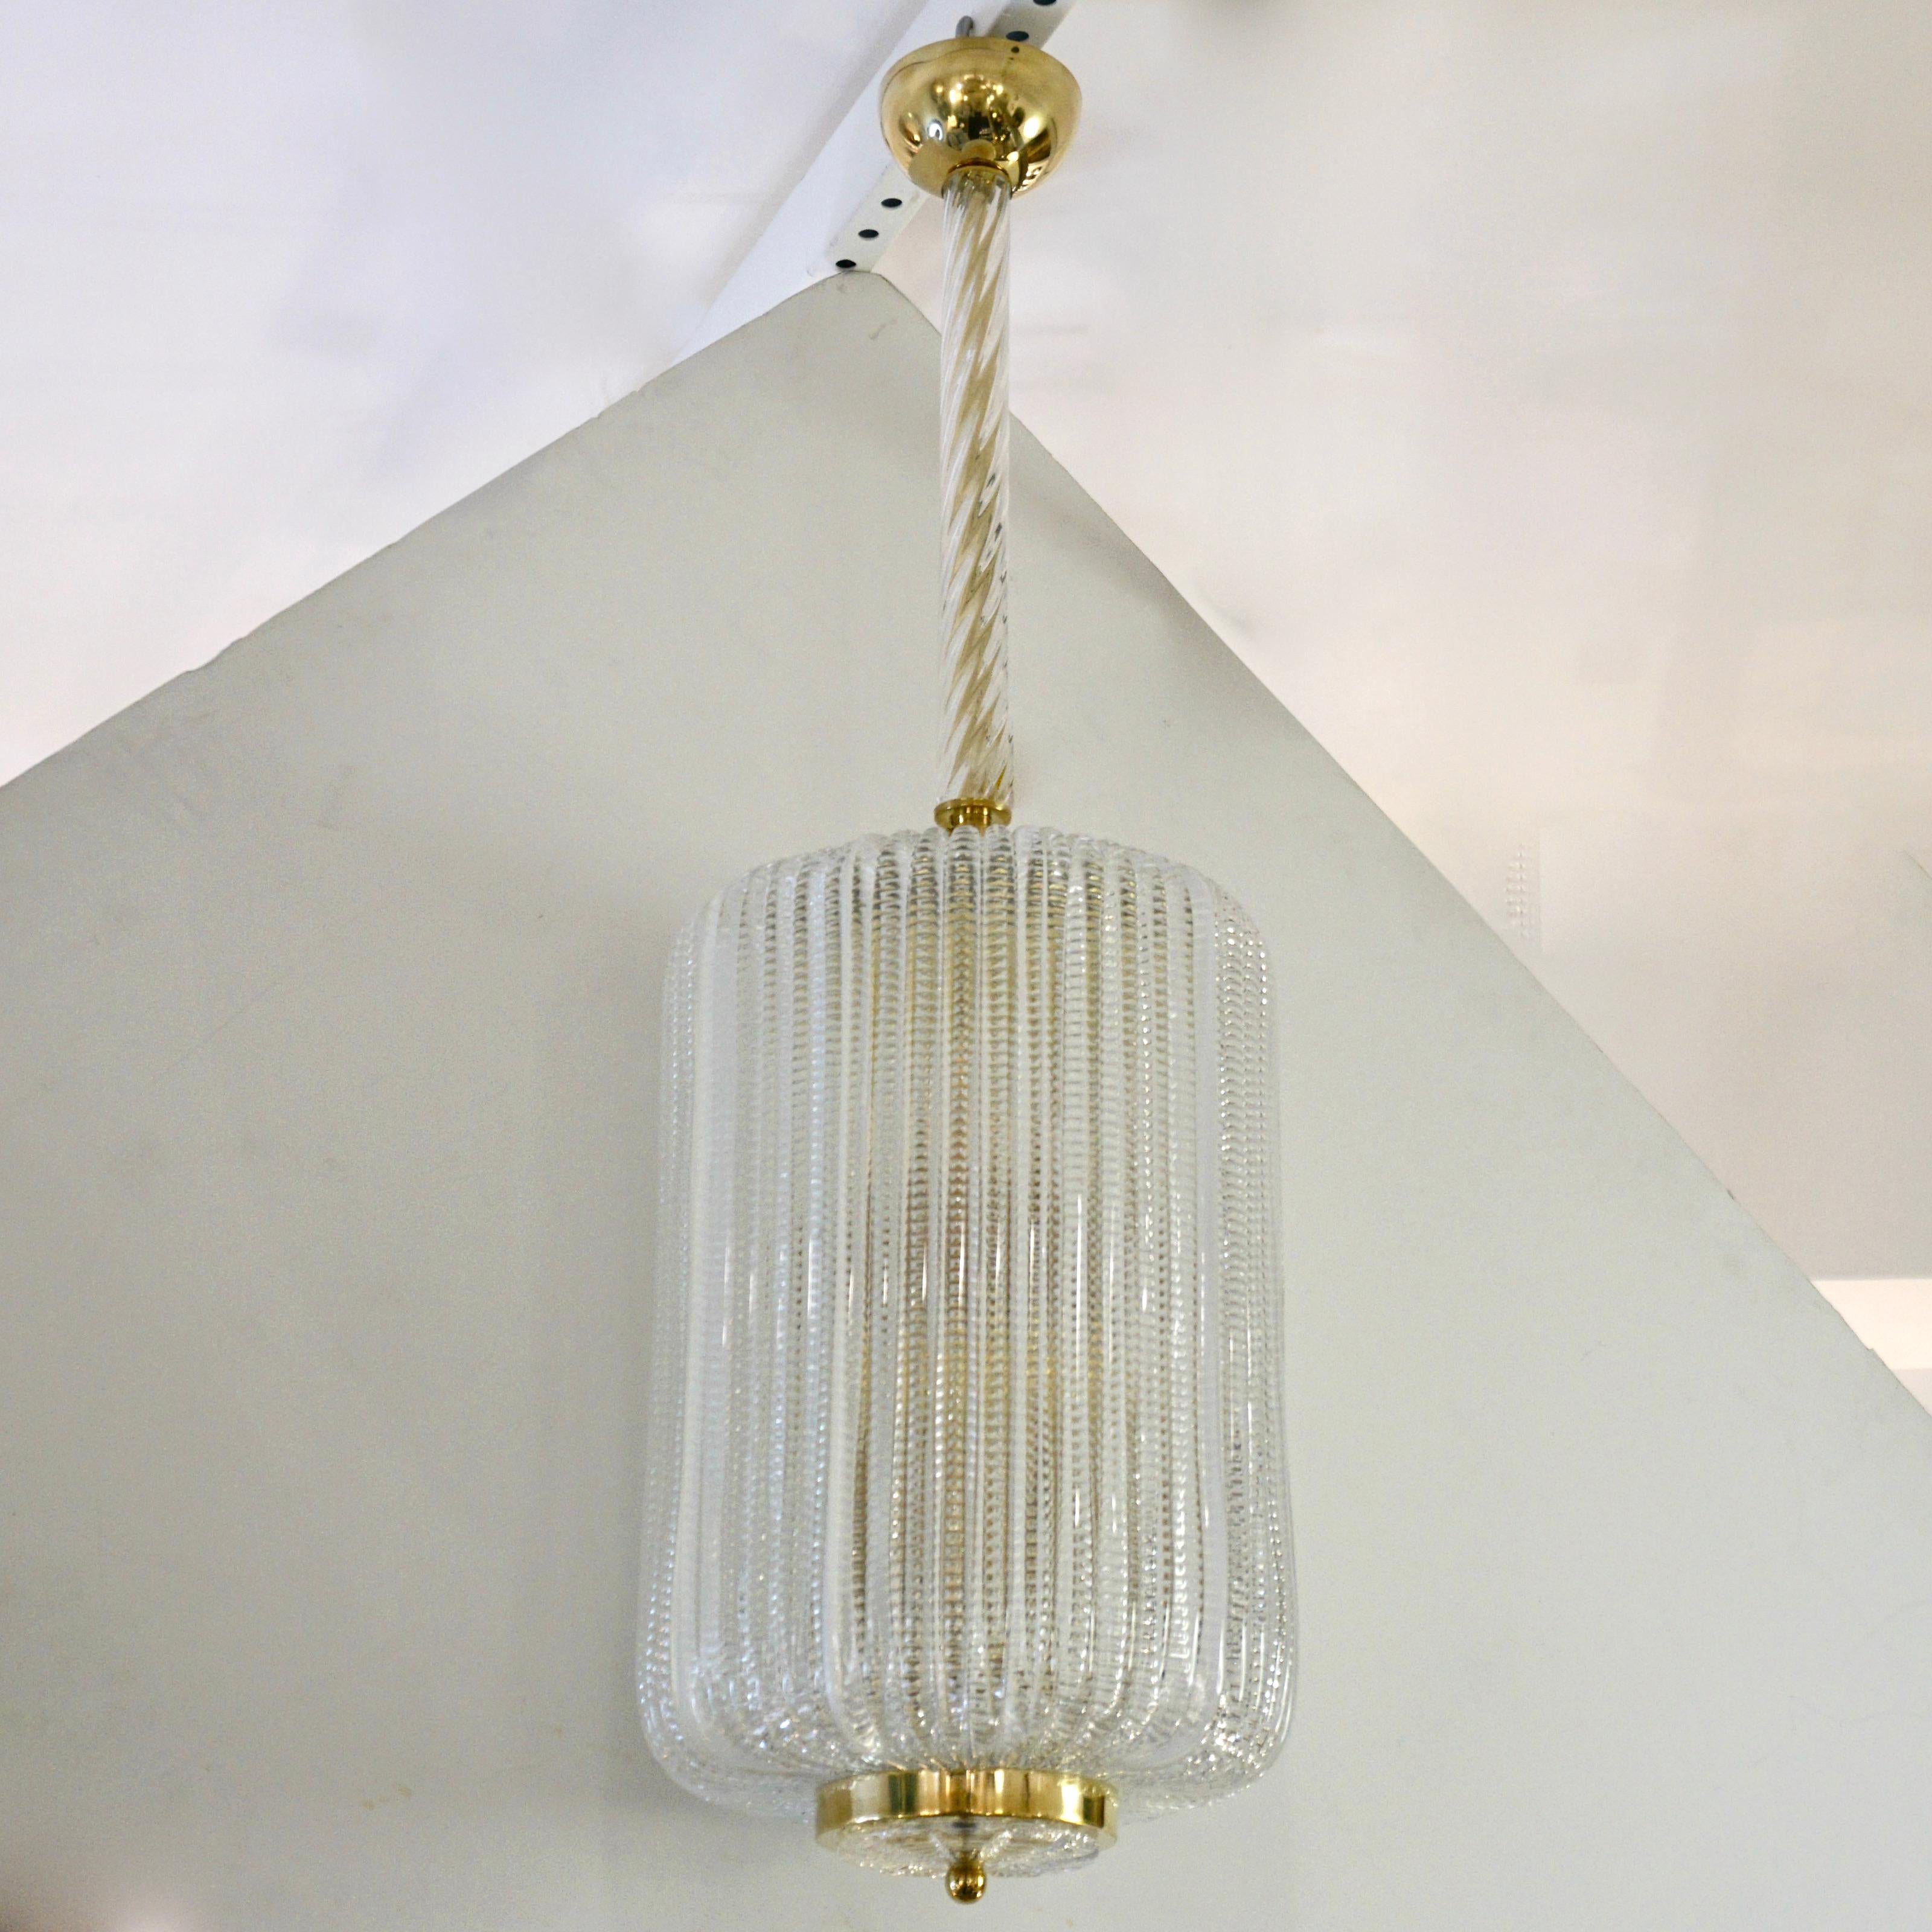 Very stylish Yet minimalist: a Venetian pendant light or chandelier, entirely handcrafted in Italy, in mid-20th century Mazzega style, with an oval cylindrical shape closed at top and bottom with brass covers, consisting of precious textured crystal